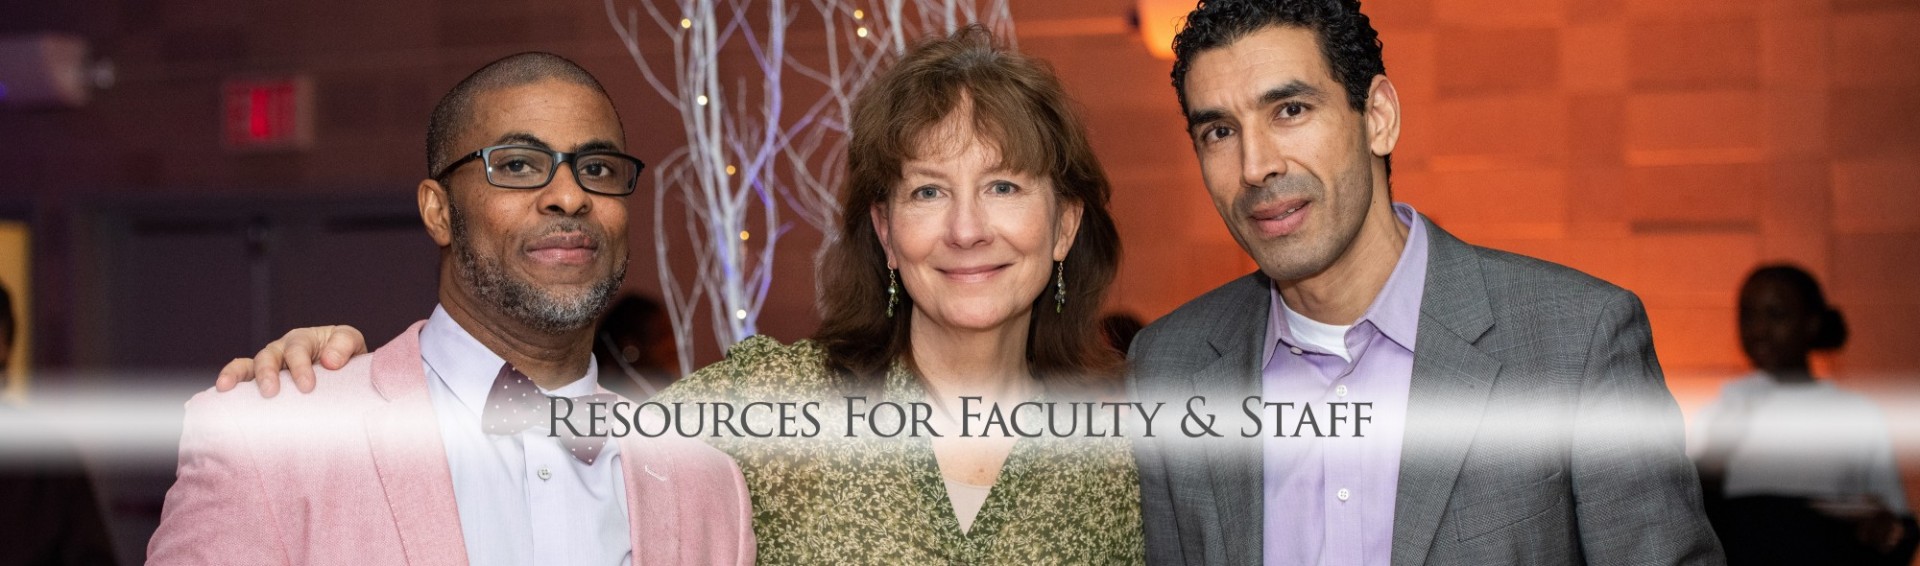 Resources For Faculty & Staff